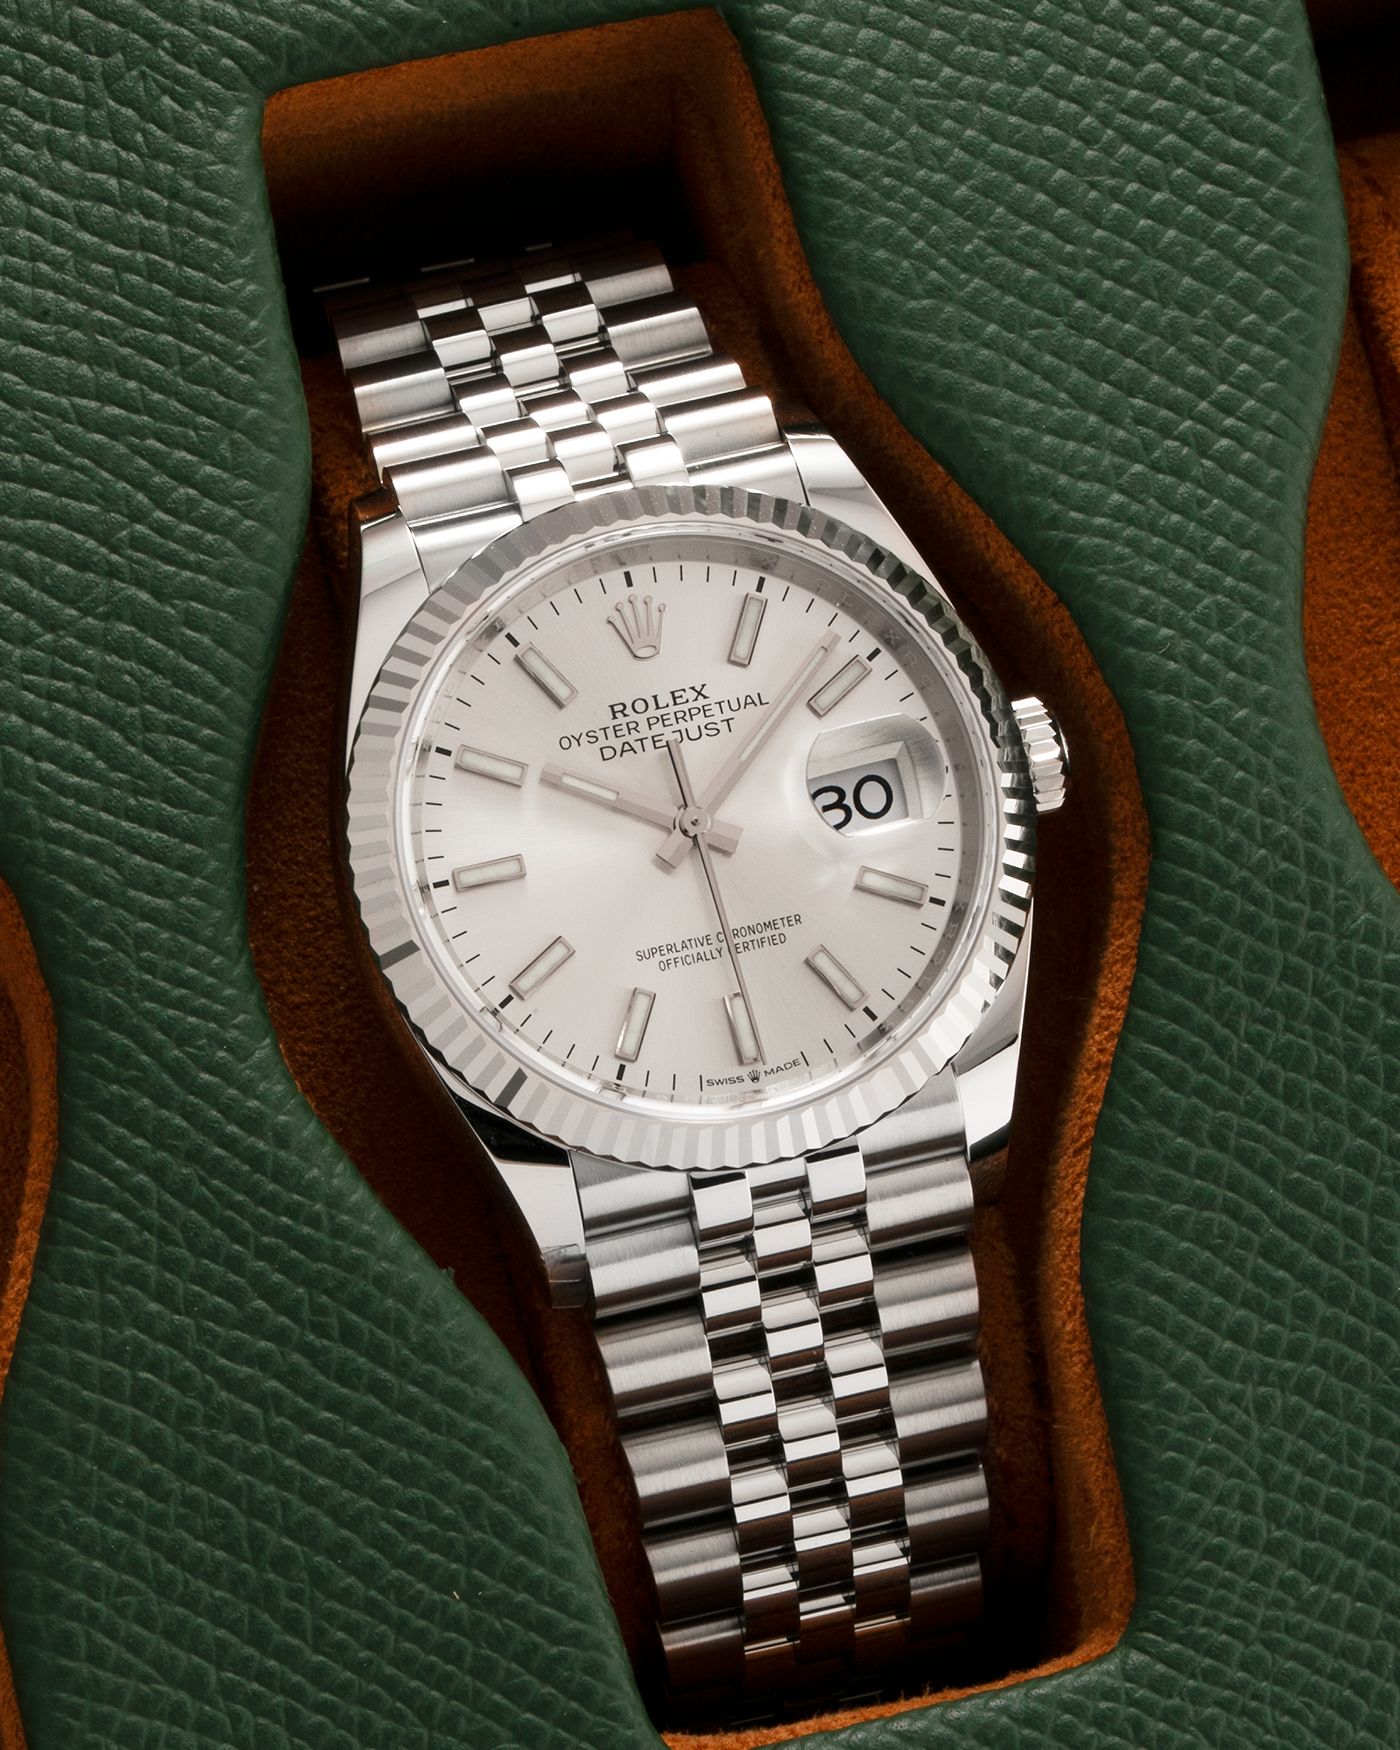 Brand: Rolex Year: 2023 Model: Datejust Reference Number: 126234 Material: 904L Stainless Steel Movement: Cal. 3235, Self-Winding Case Diameter: 36mm Bracelet: Rolex Stainless Steel Jubilee Bracelet